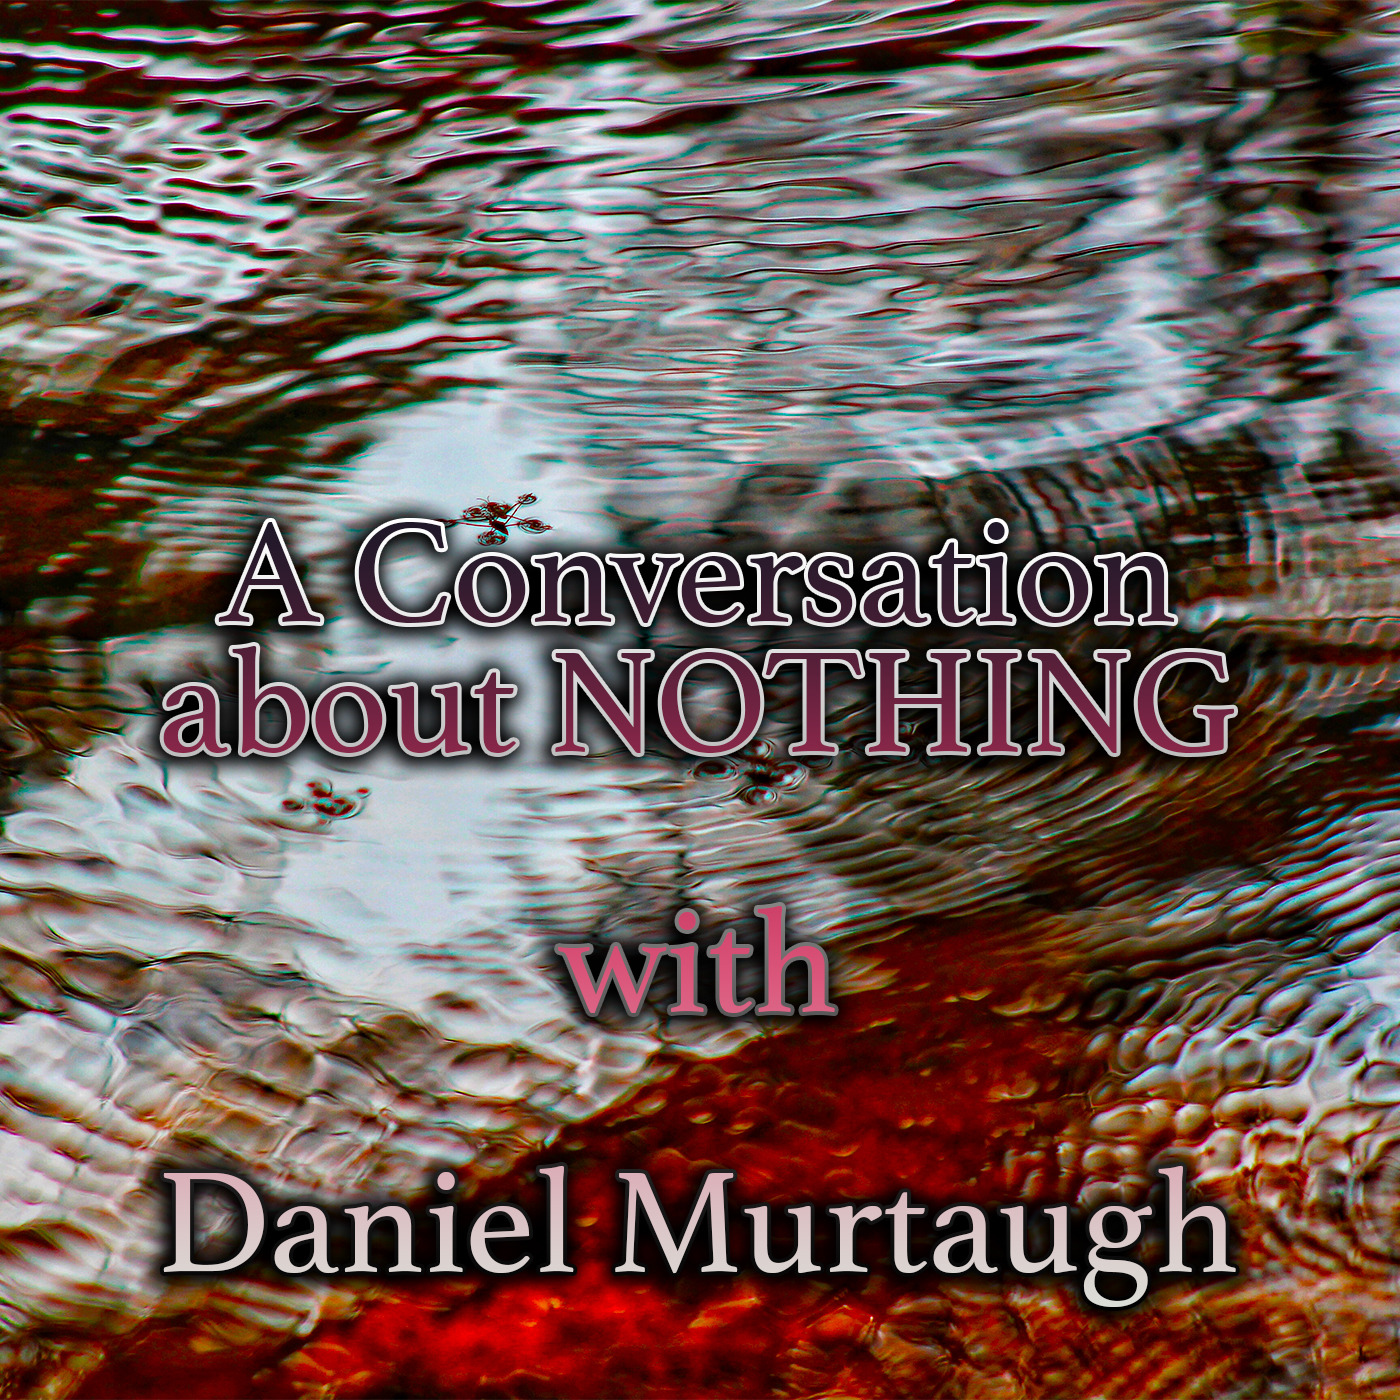 Episode 157: A Conversation about NOTHING with Daniel Murtaugh